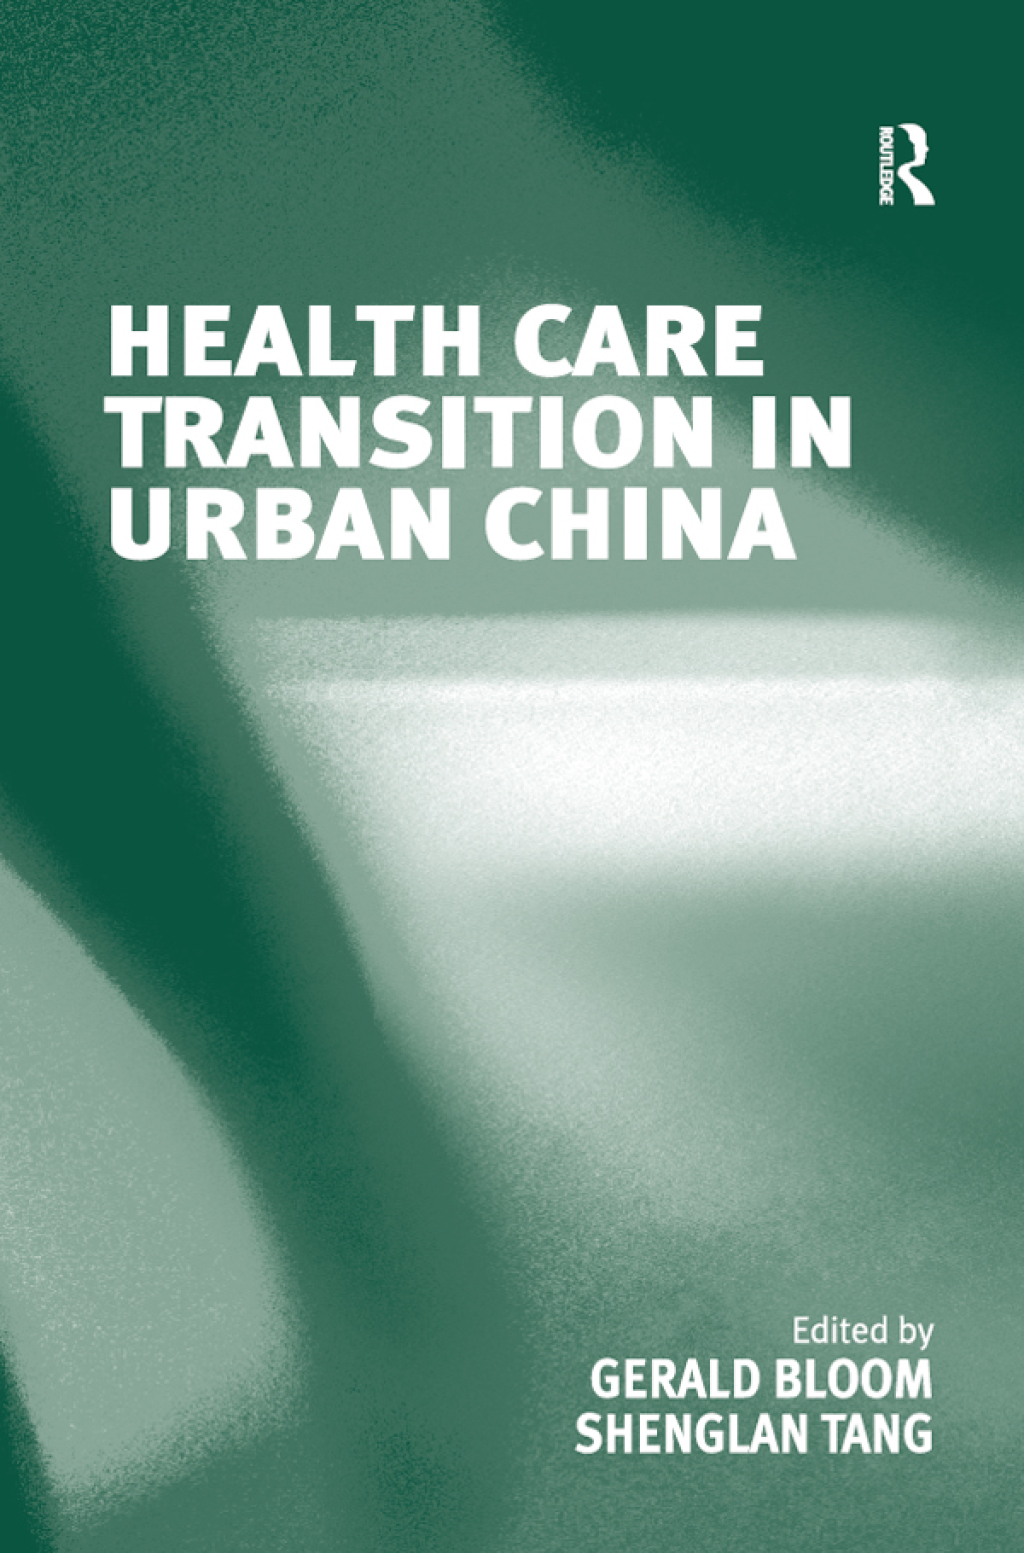 ISBN 9780754639664 product image for Health Care Transition in Urban China - 1st Edition (eBook Rental) | upcitemdb.com